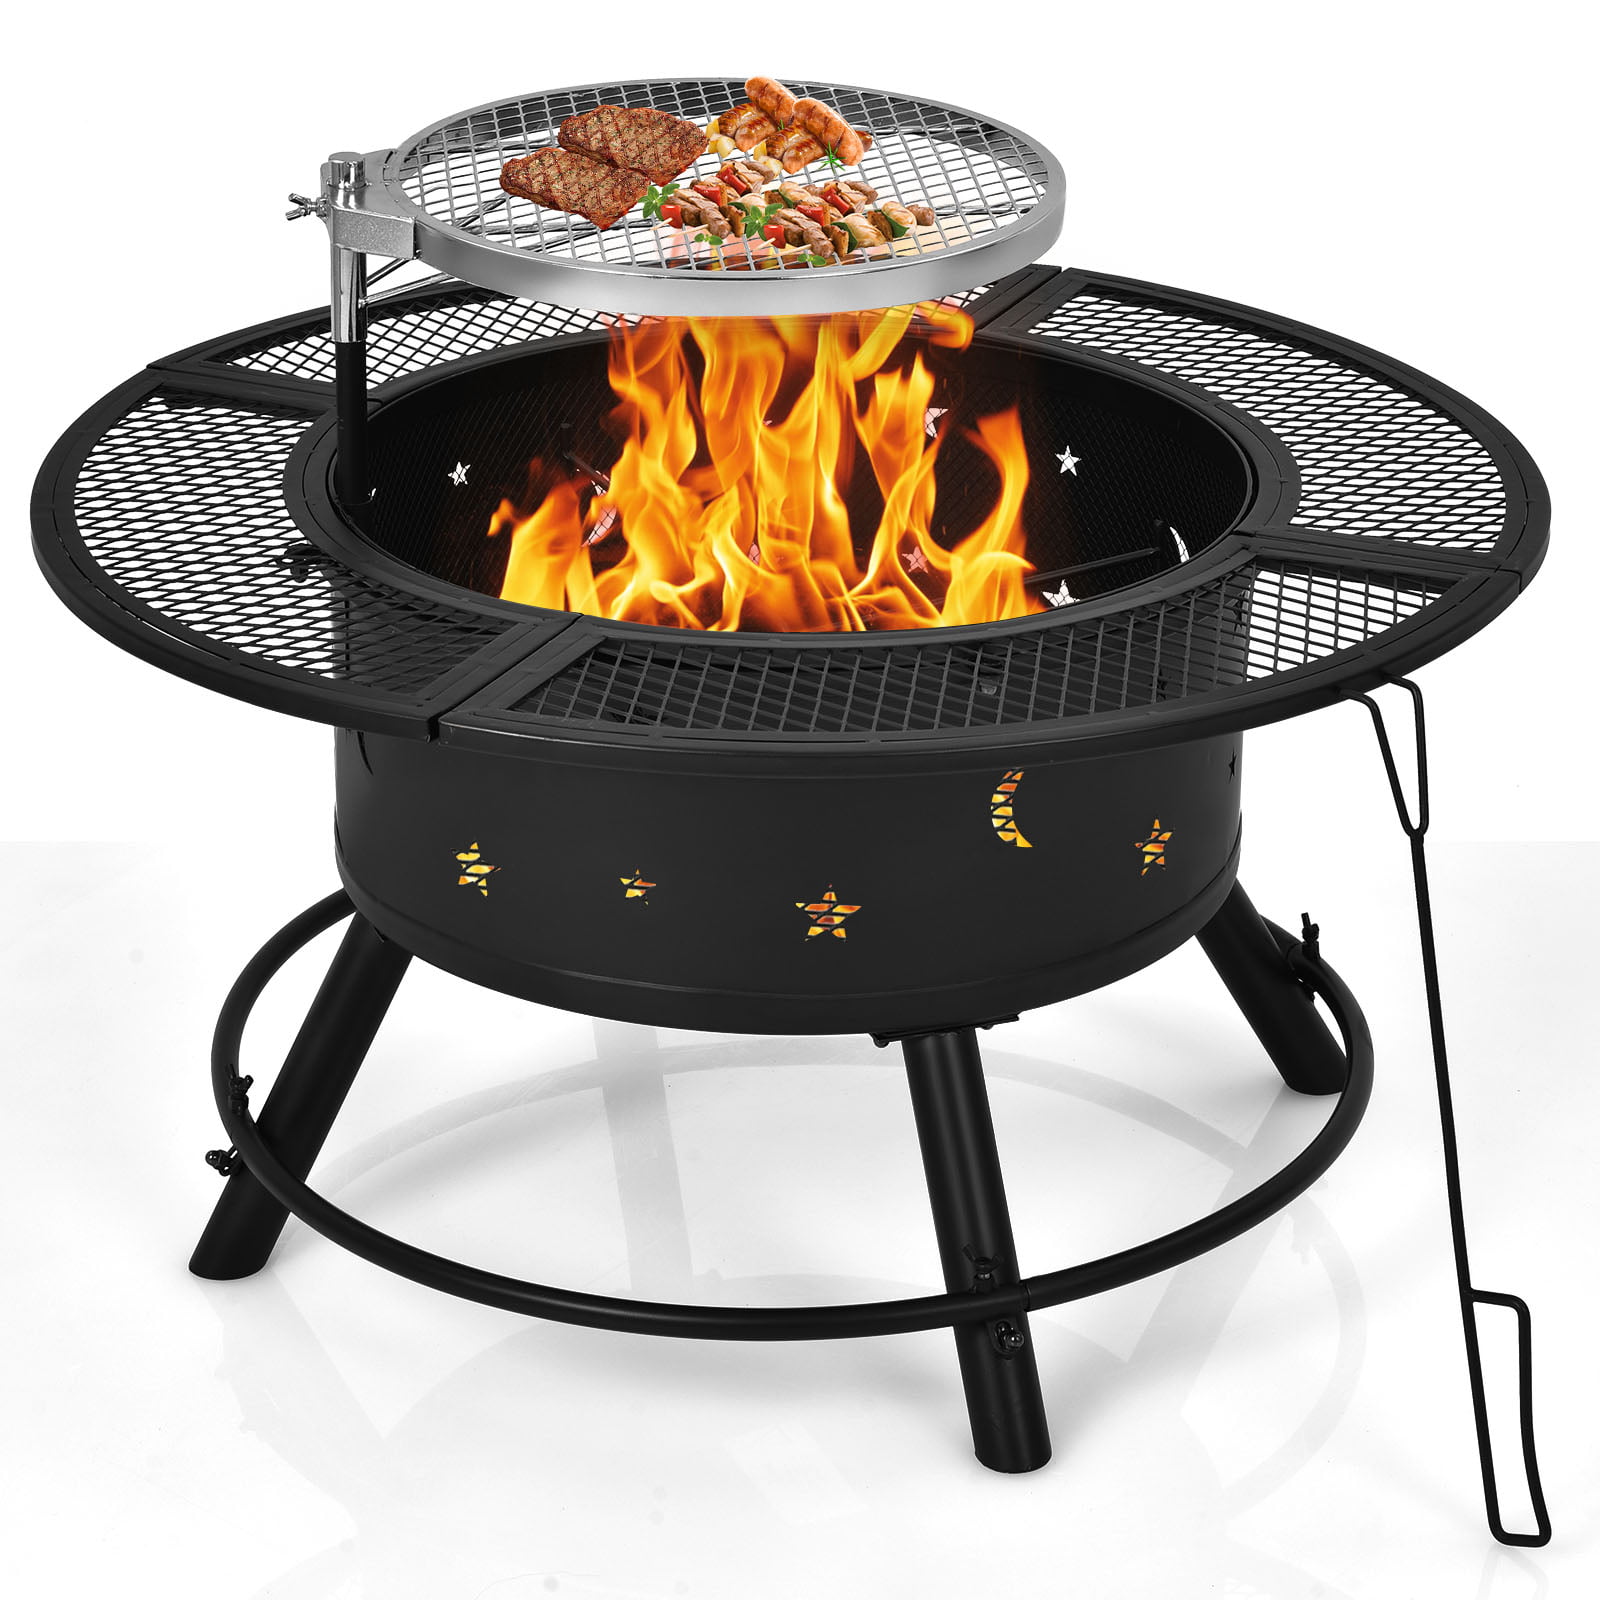 Round Cast Iron Grill Grate, Barbecue Accessories, Gift for Men, Outdoor  Patio BBQ, Camping Cooking, Wood Burning Mangal, Brazier, Fire Pit 